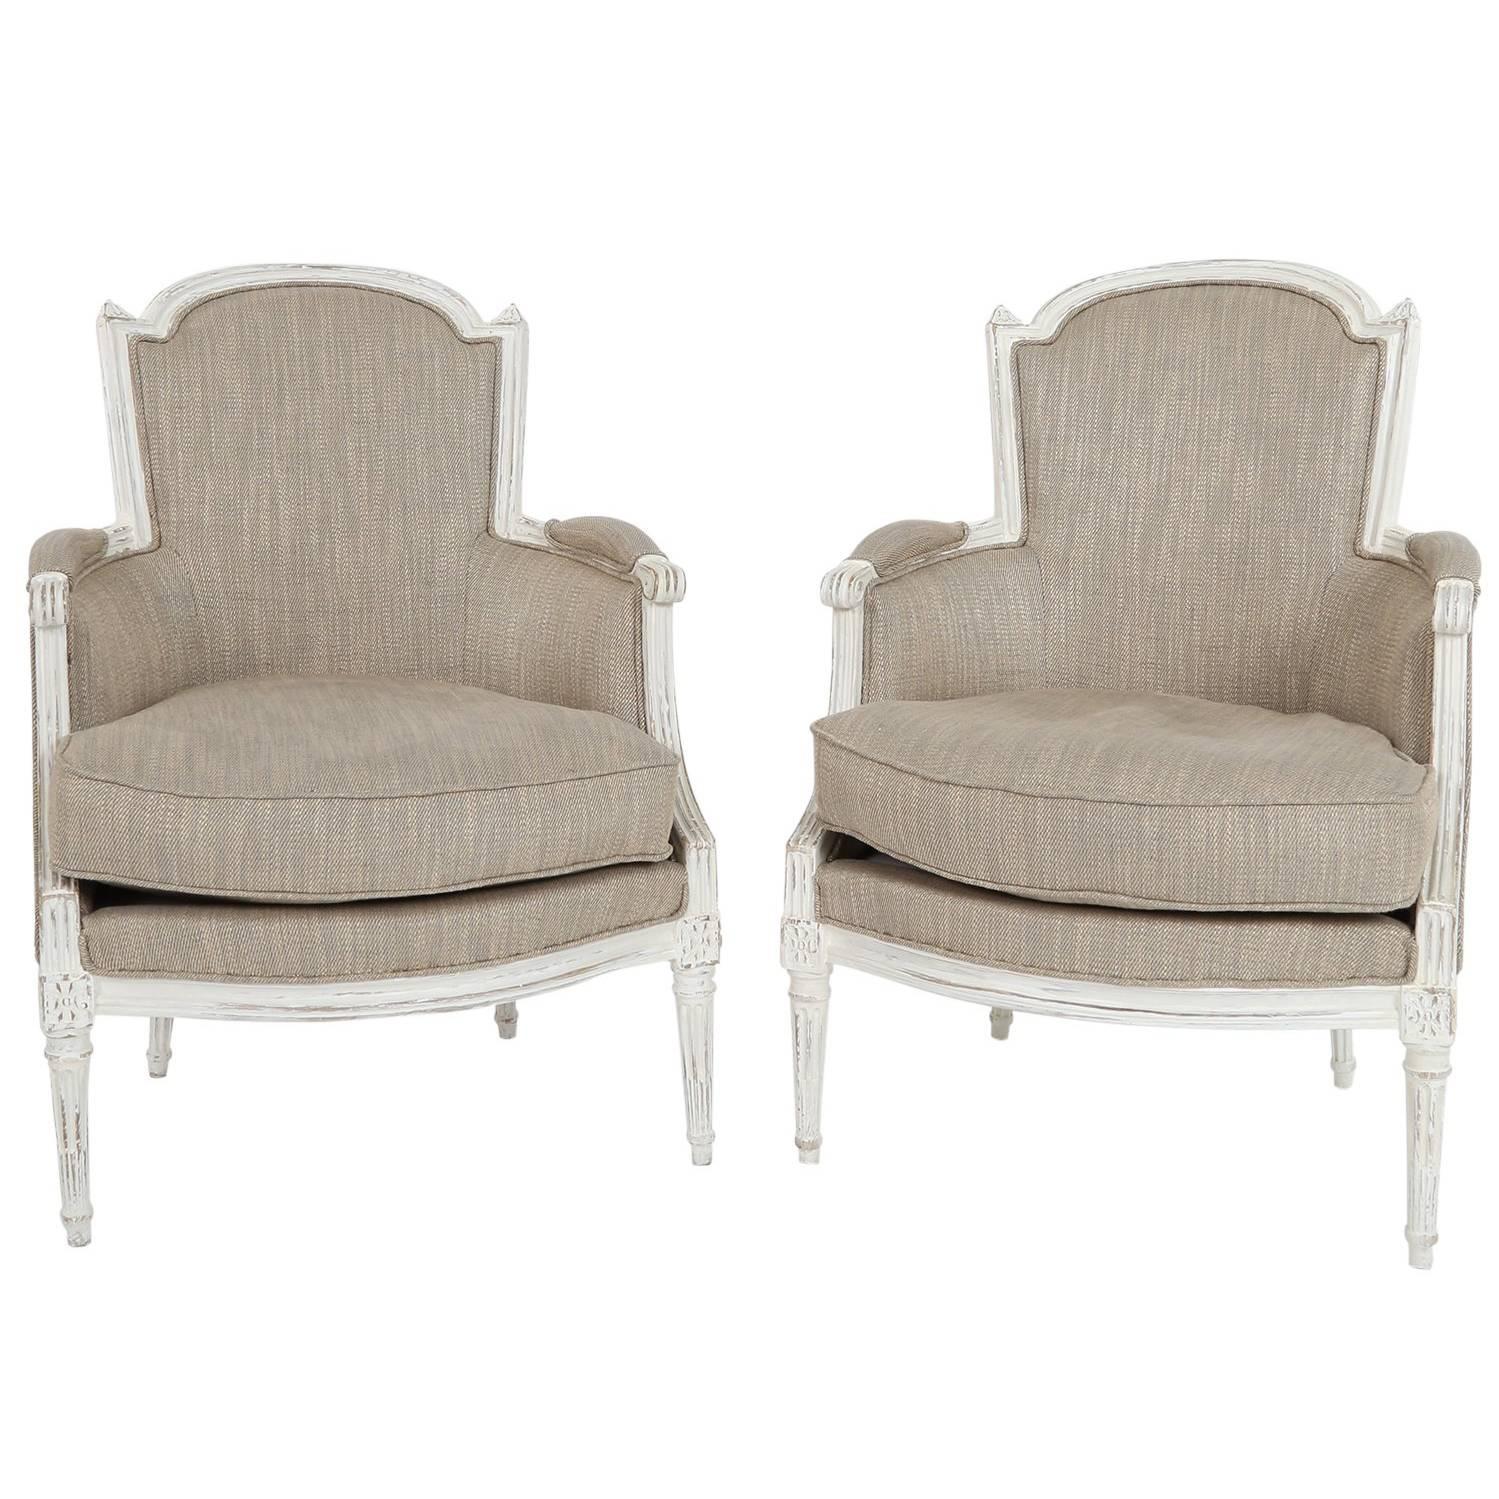 Pair of French Louis XVI Bergères Chairs 18th Century Gustavian/Shabby Chic Styl For Sale